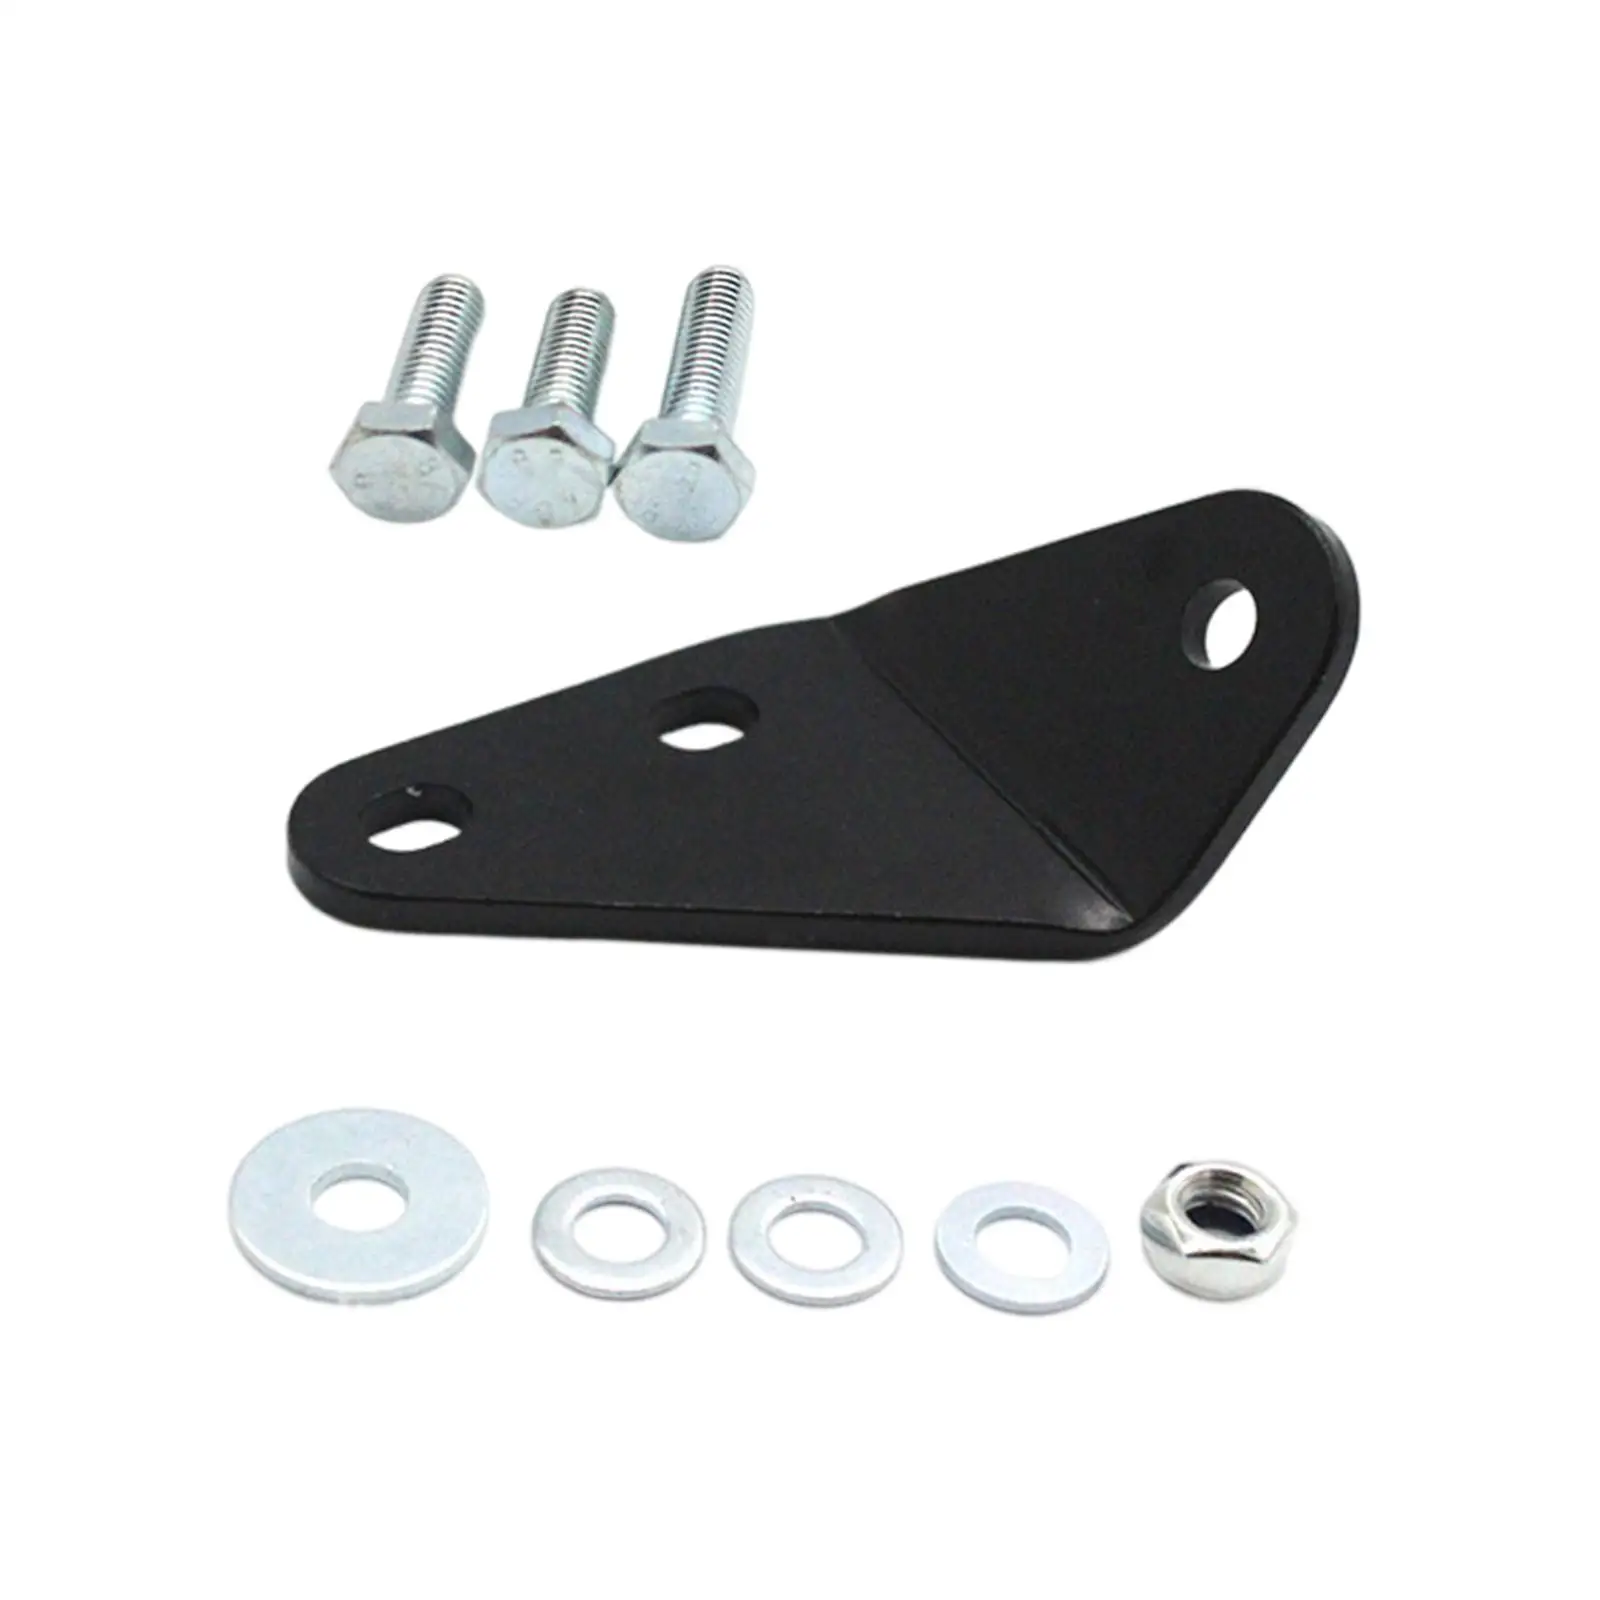 Clutch Pedal Repair Bracket Kit Directly Replace Easy Installation Sturdy for VW T4 Transporter Multivan Accessory